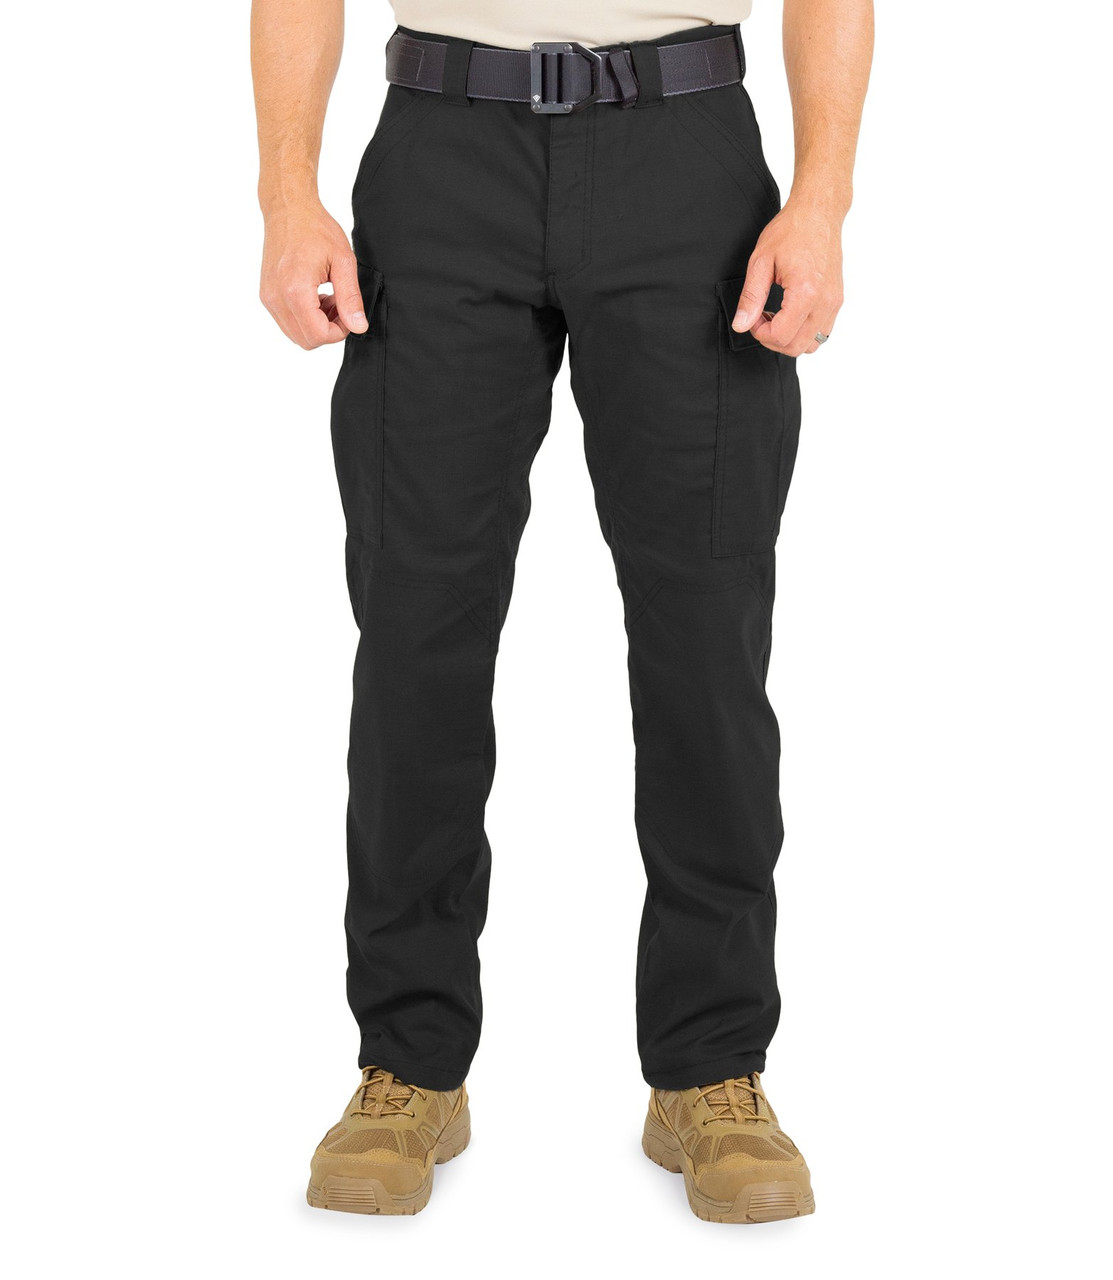 First Tactical Men's Cotton Cargo Station